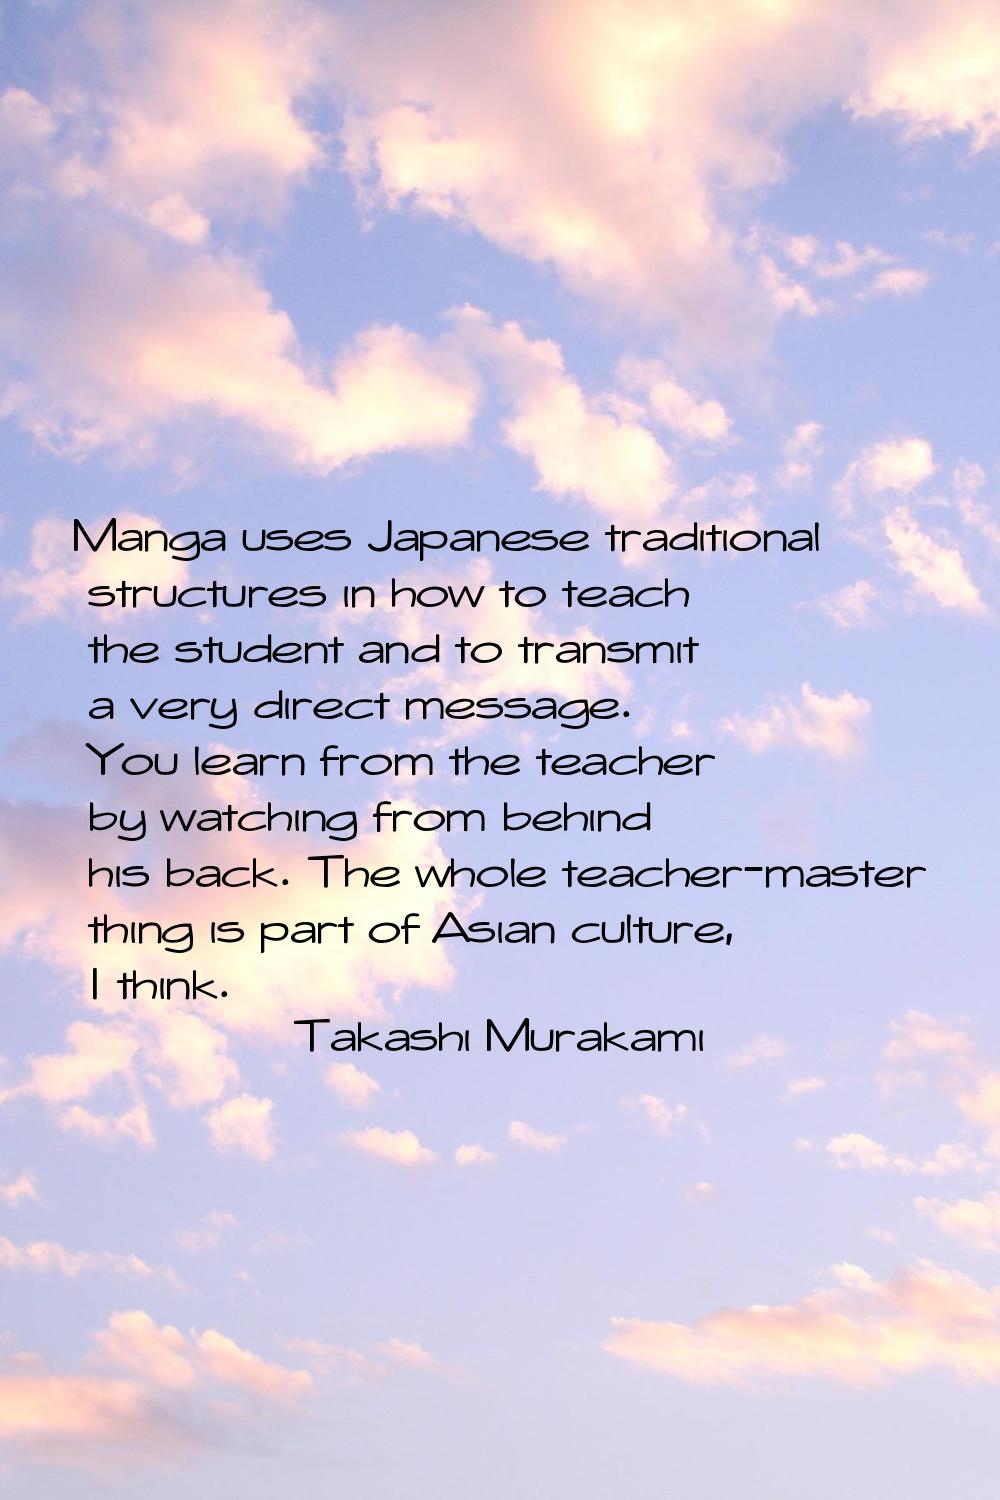 Manga uses Japanese traditional structures in how to teach the student and to transmit a very direc